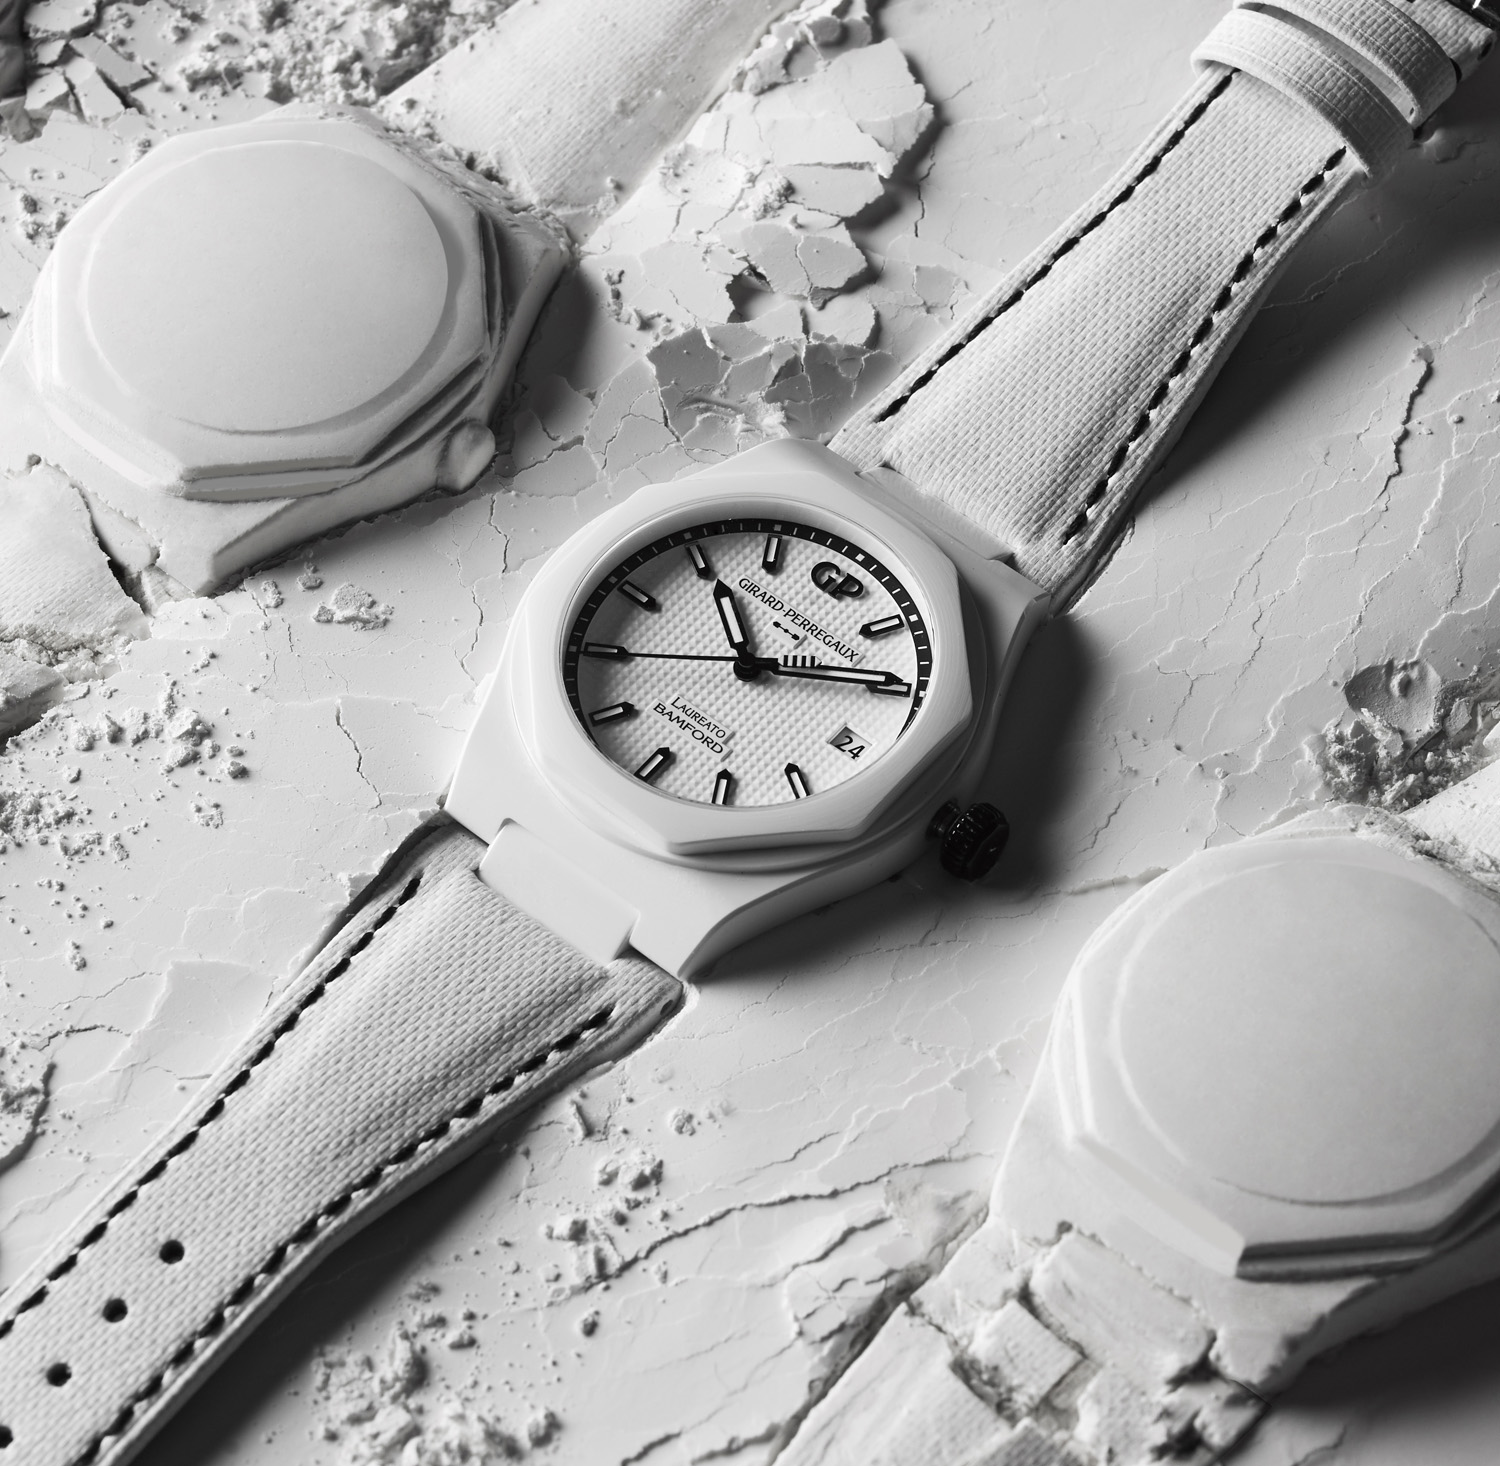 Watchmaker George Bamford Tells Us Why (the MW08's) Ceramic is Such a Hot Material